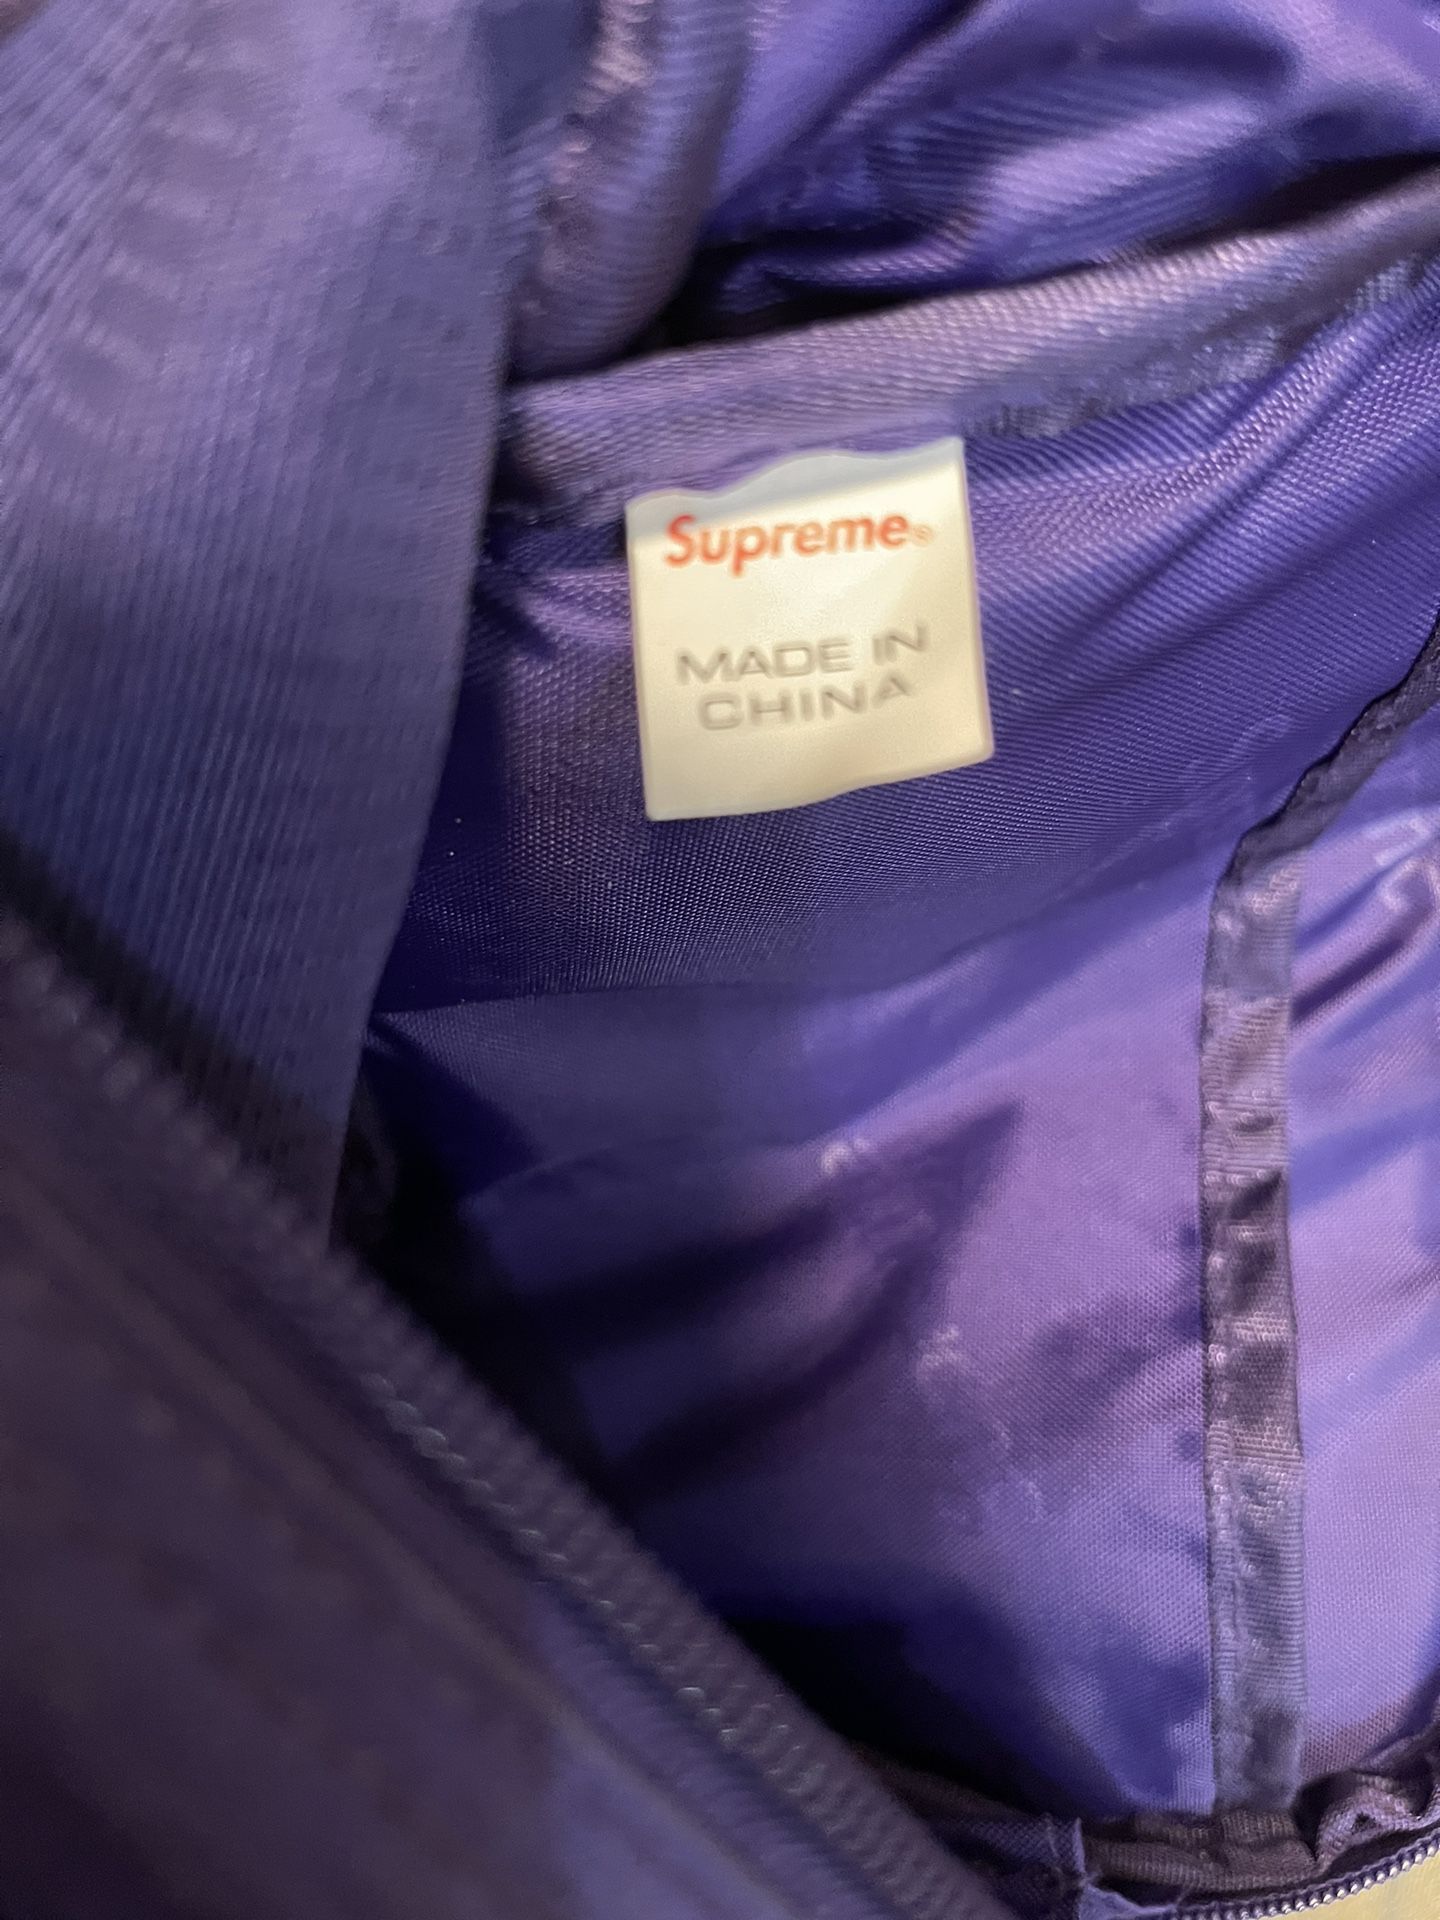 Supreme Big Arc Crewneck (Pale Royal) for Sale in Long Beach, CA - OfferUp